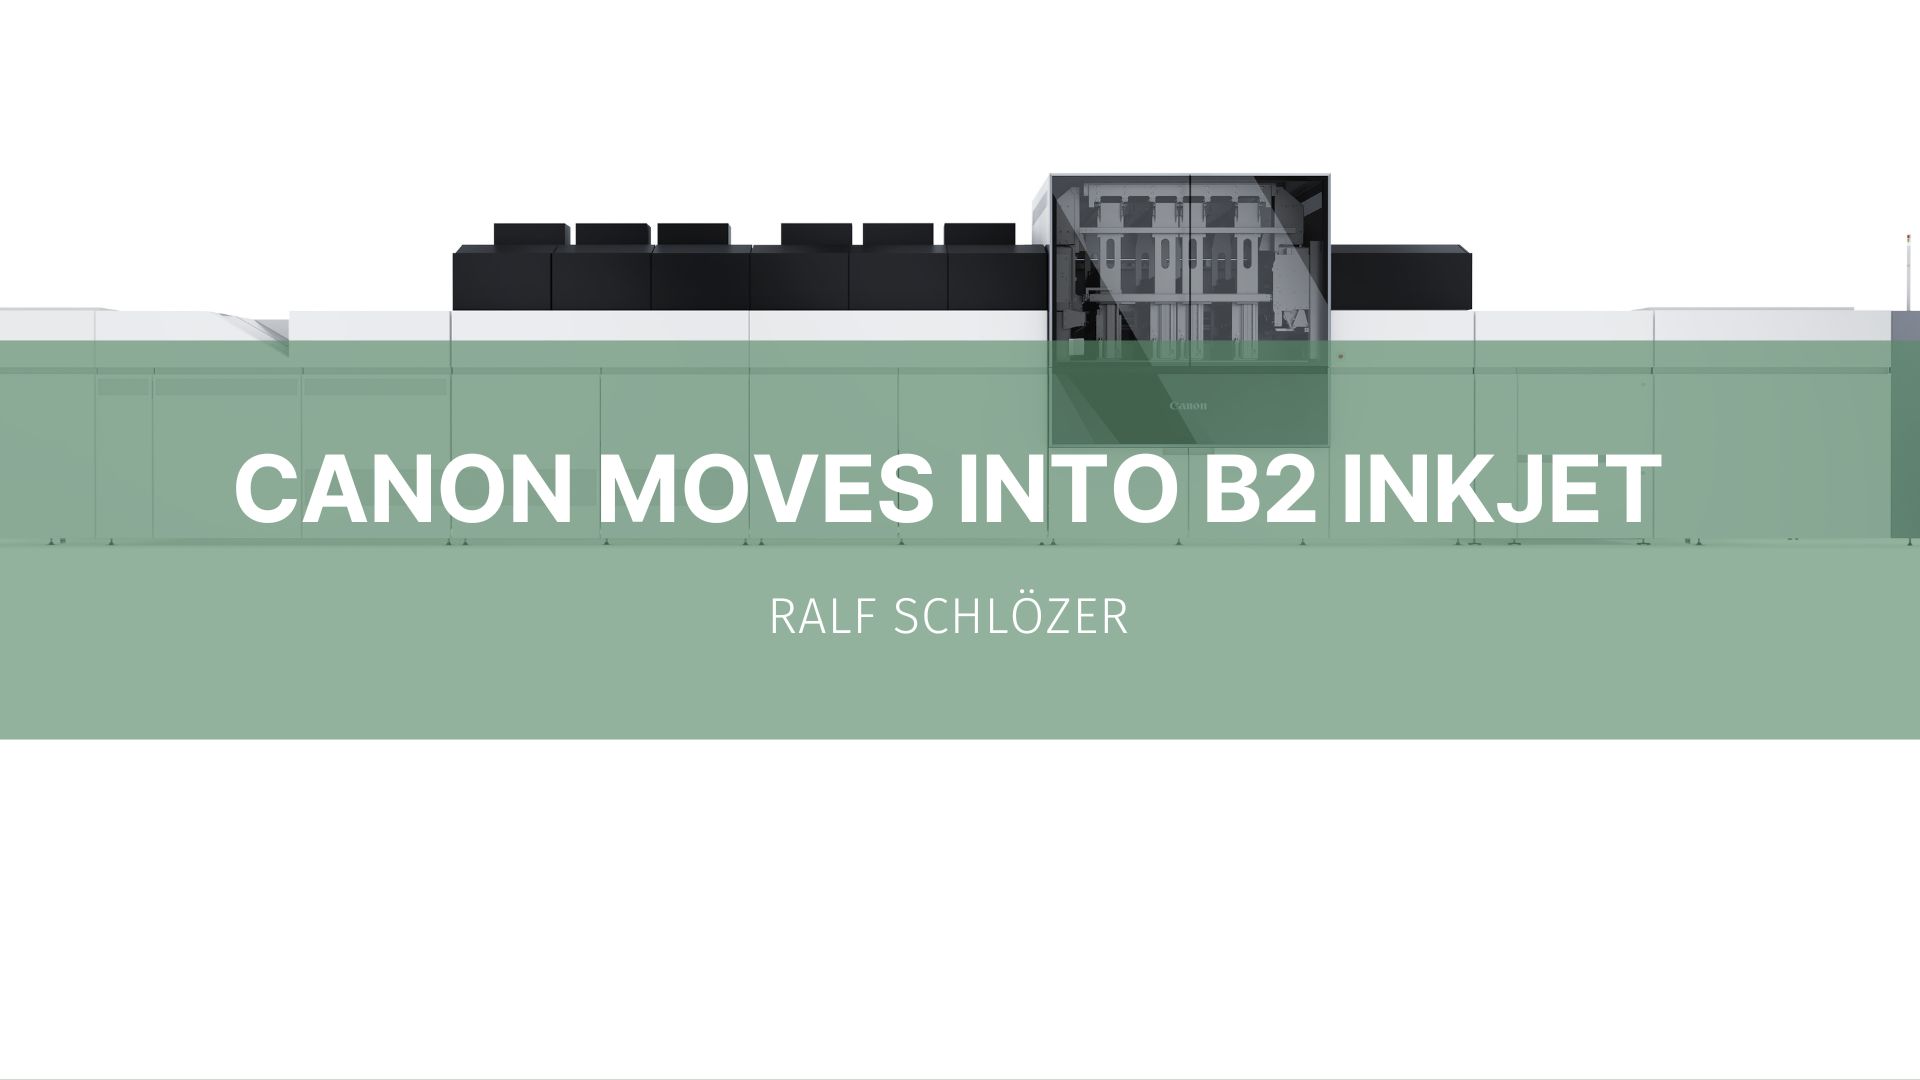 Featured image for “Canon moves into B2 inkjet”